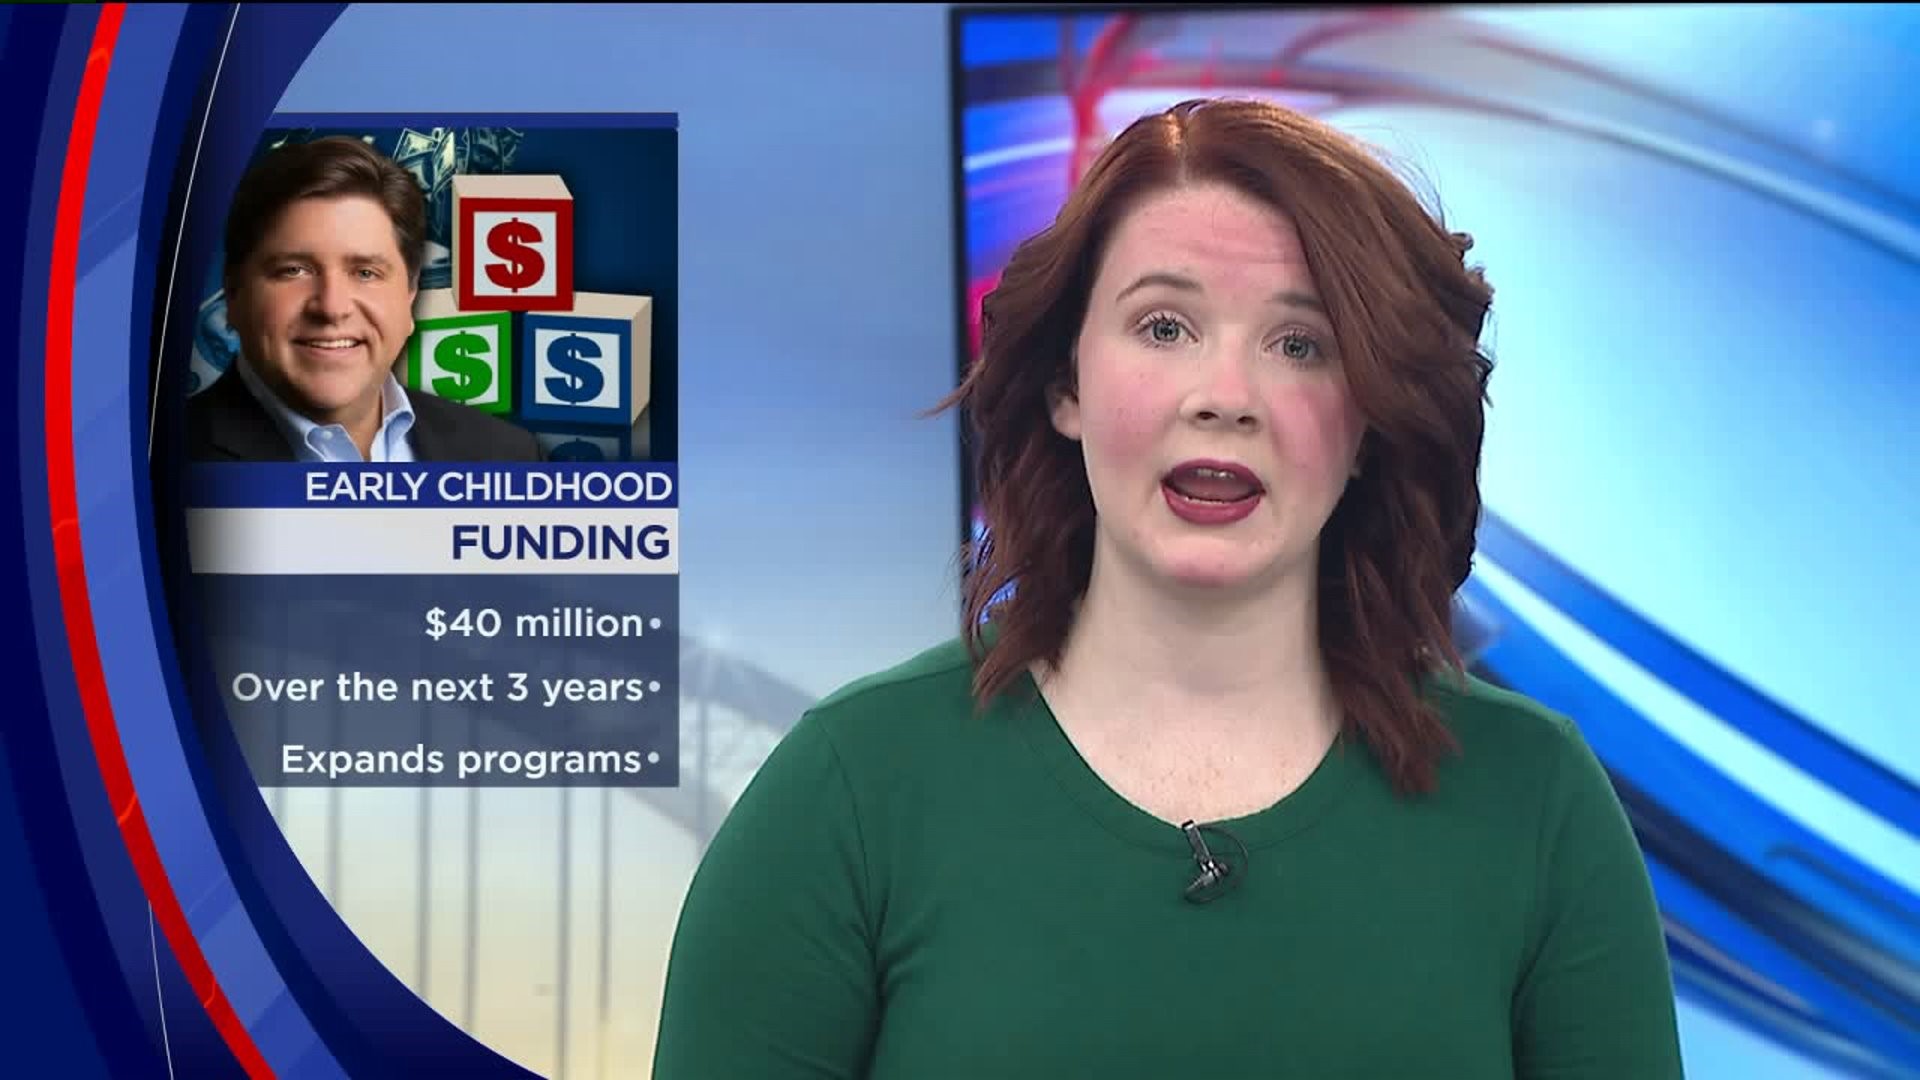 Illinois pumping money into early childhood education